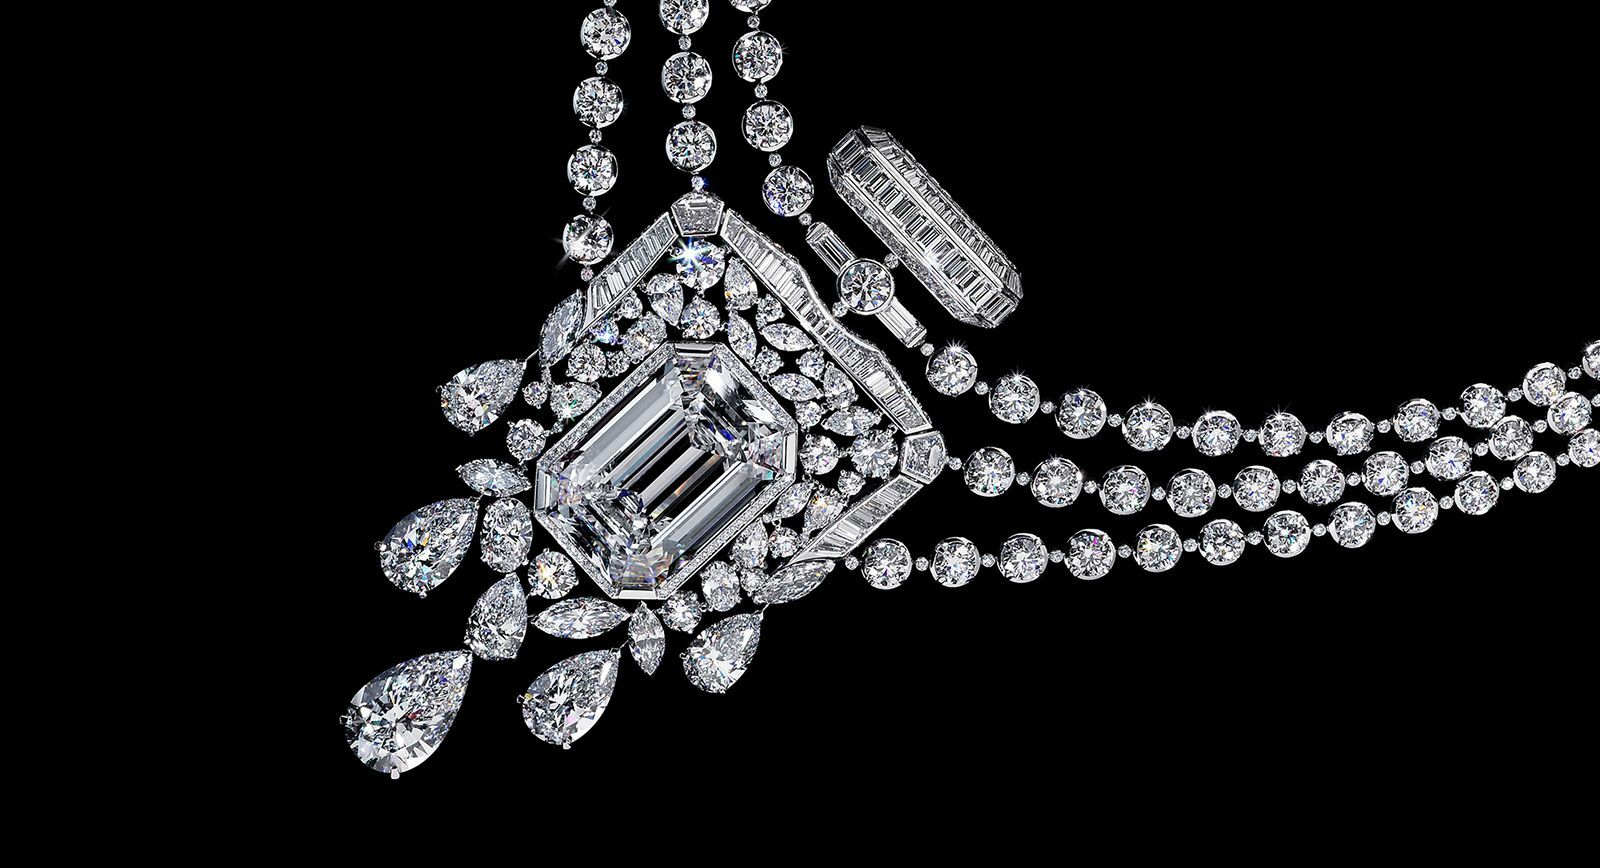 55.55 high jewellery necklace by Chanel